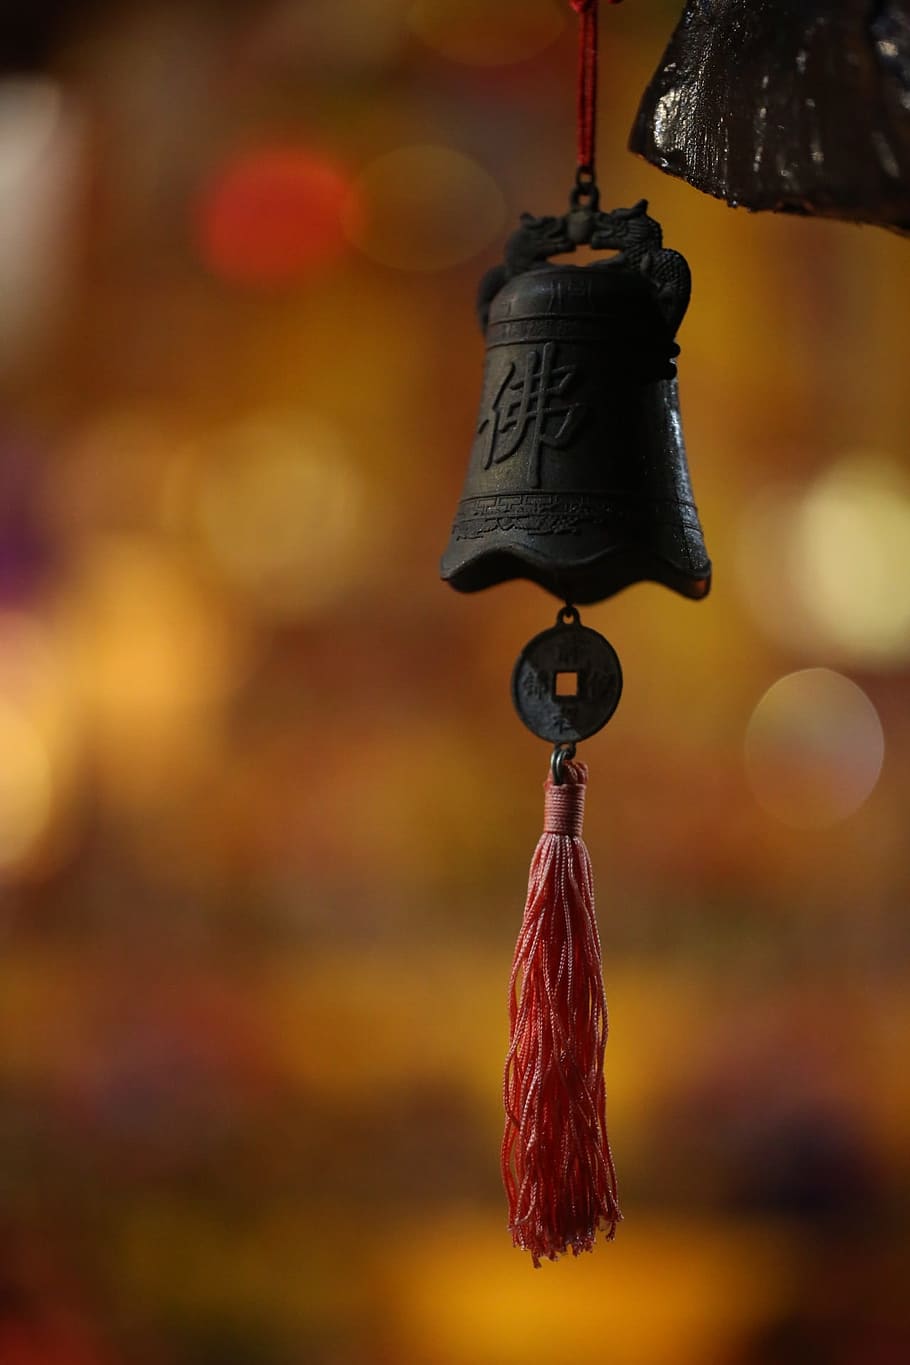 buddhism, angle ring, religion, hanging, focus on foreground, close-up, decoration, bell, wind chime, metal